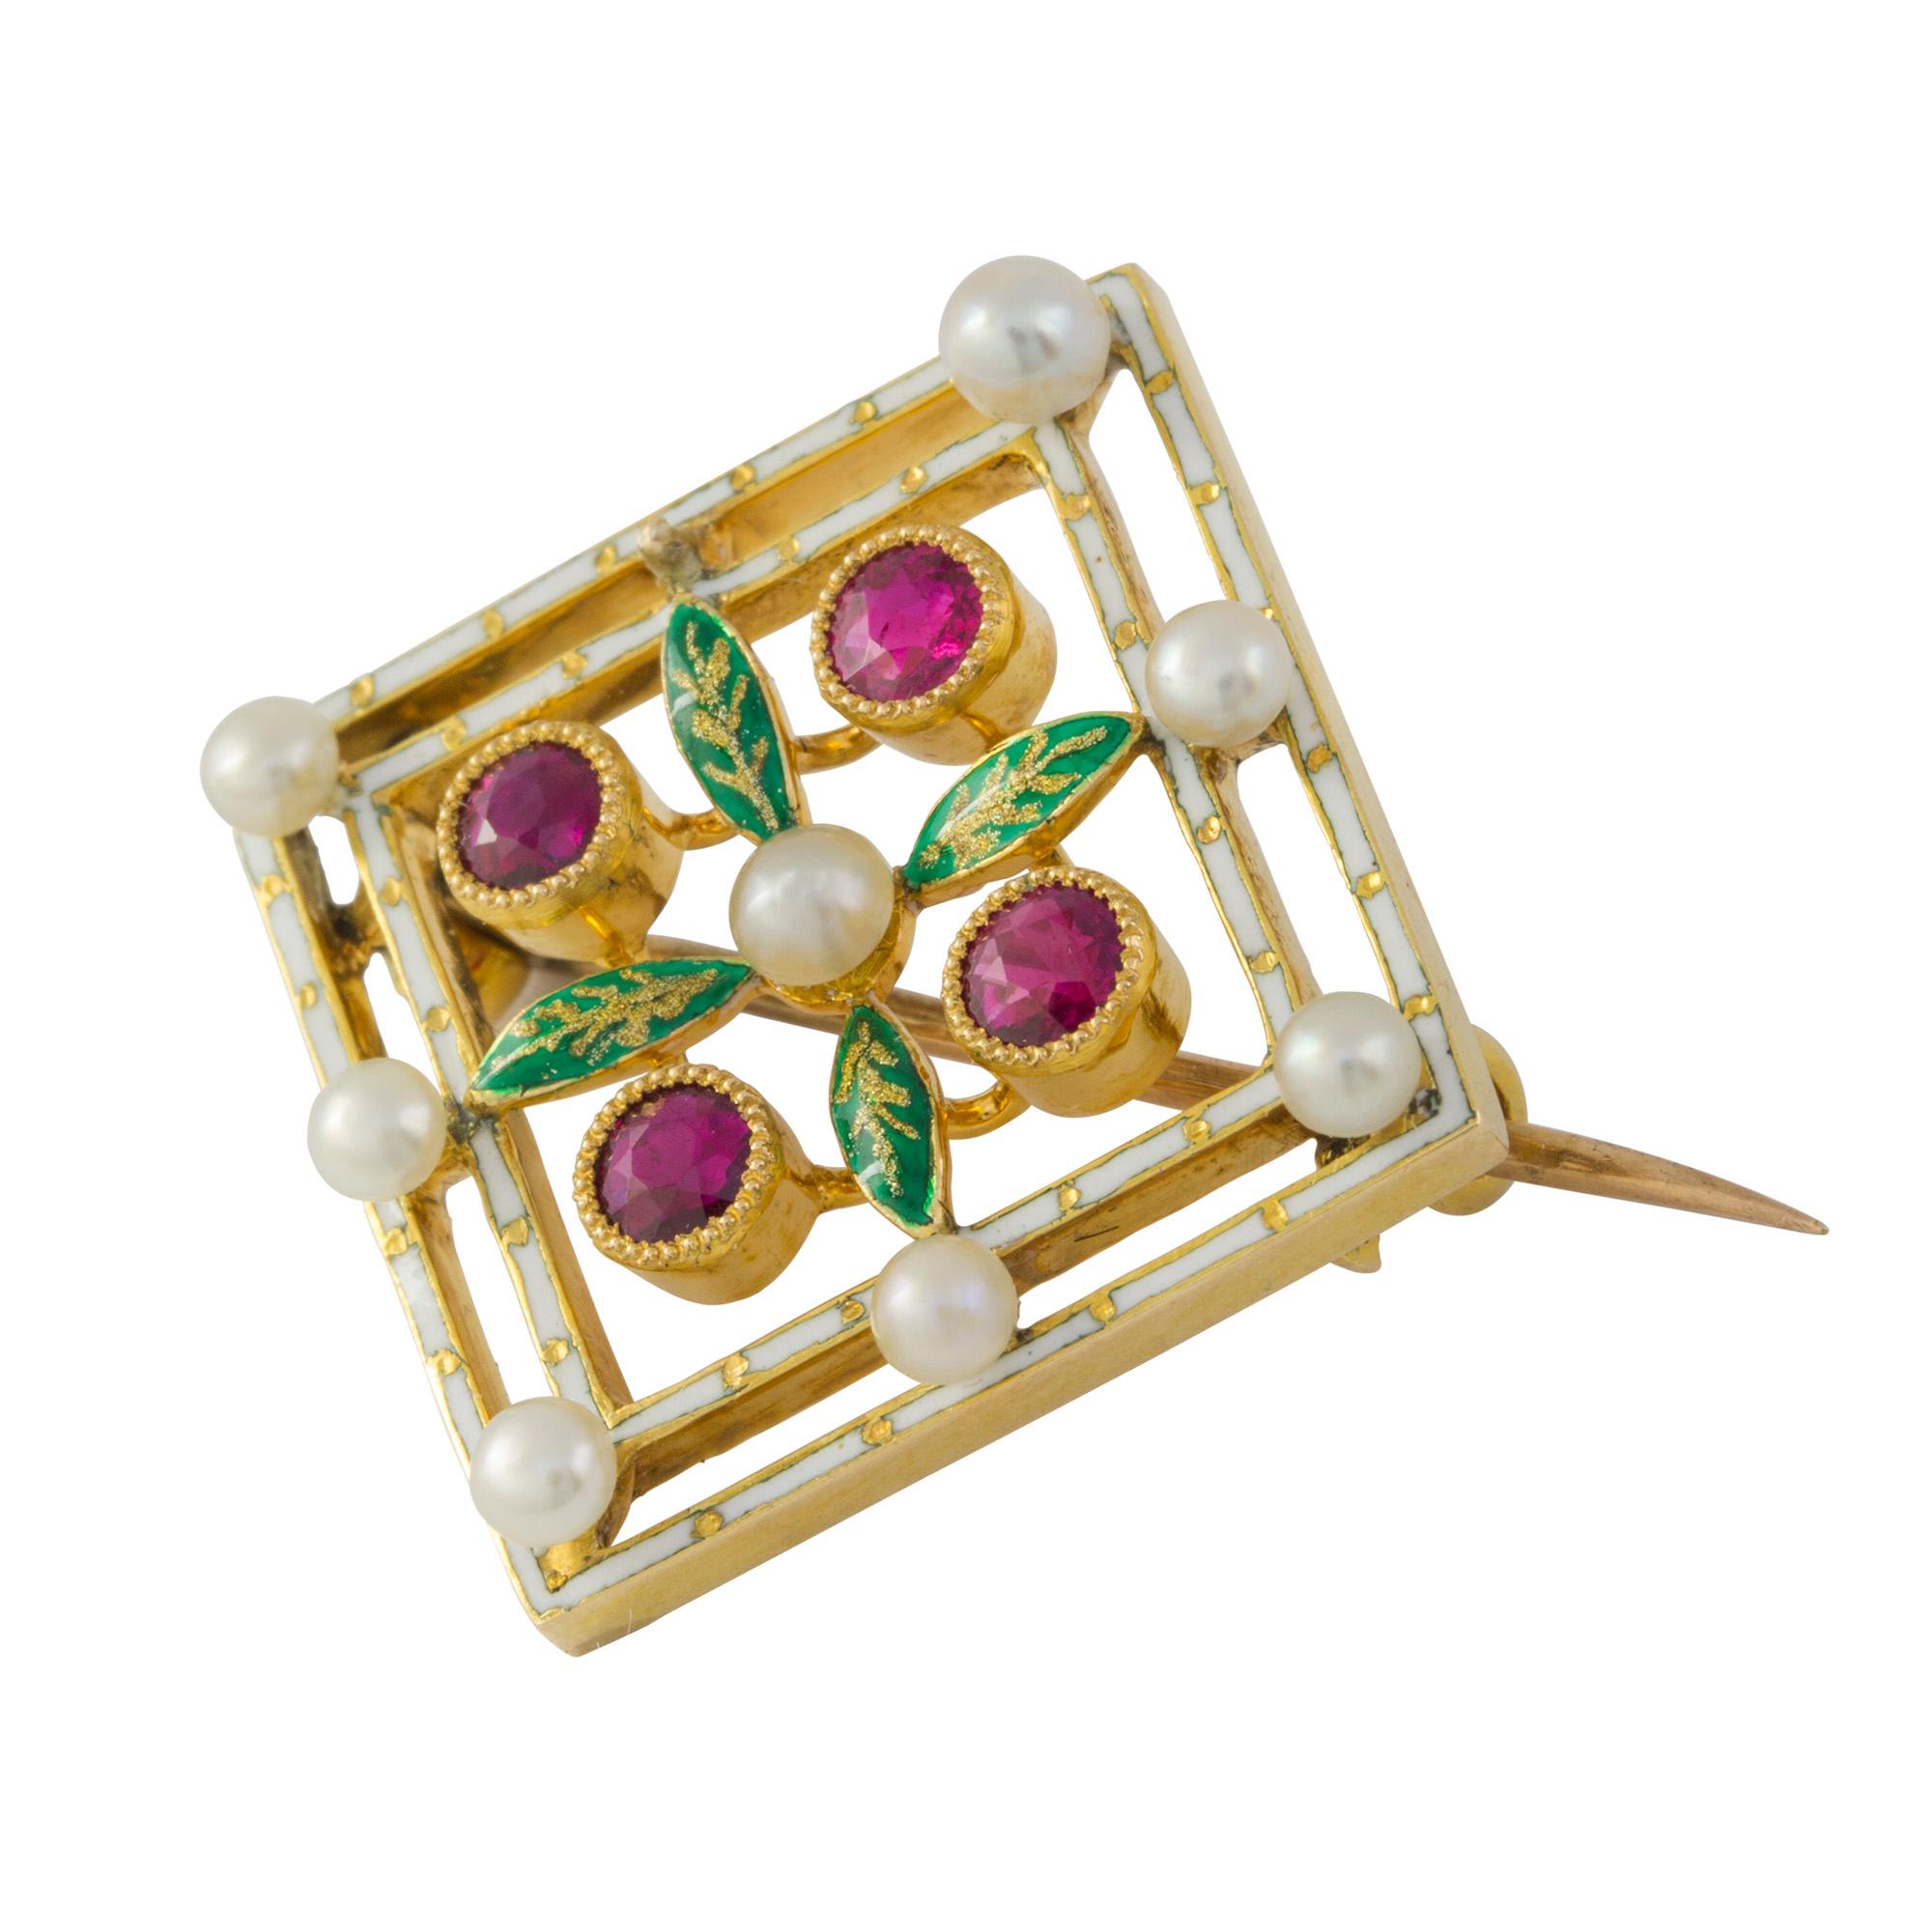 A late Victorian enamel pearl and ruby brooch, the central pearl surrounded by four round faceted rubies millegrain set in yellow gold with four green enamel leaves in between, all to a square white enamel double frame set with eight pearls, all to